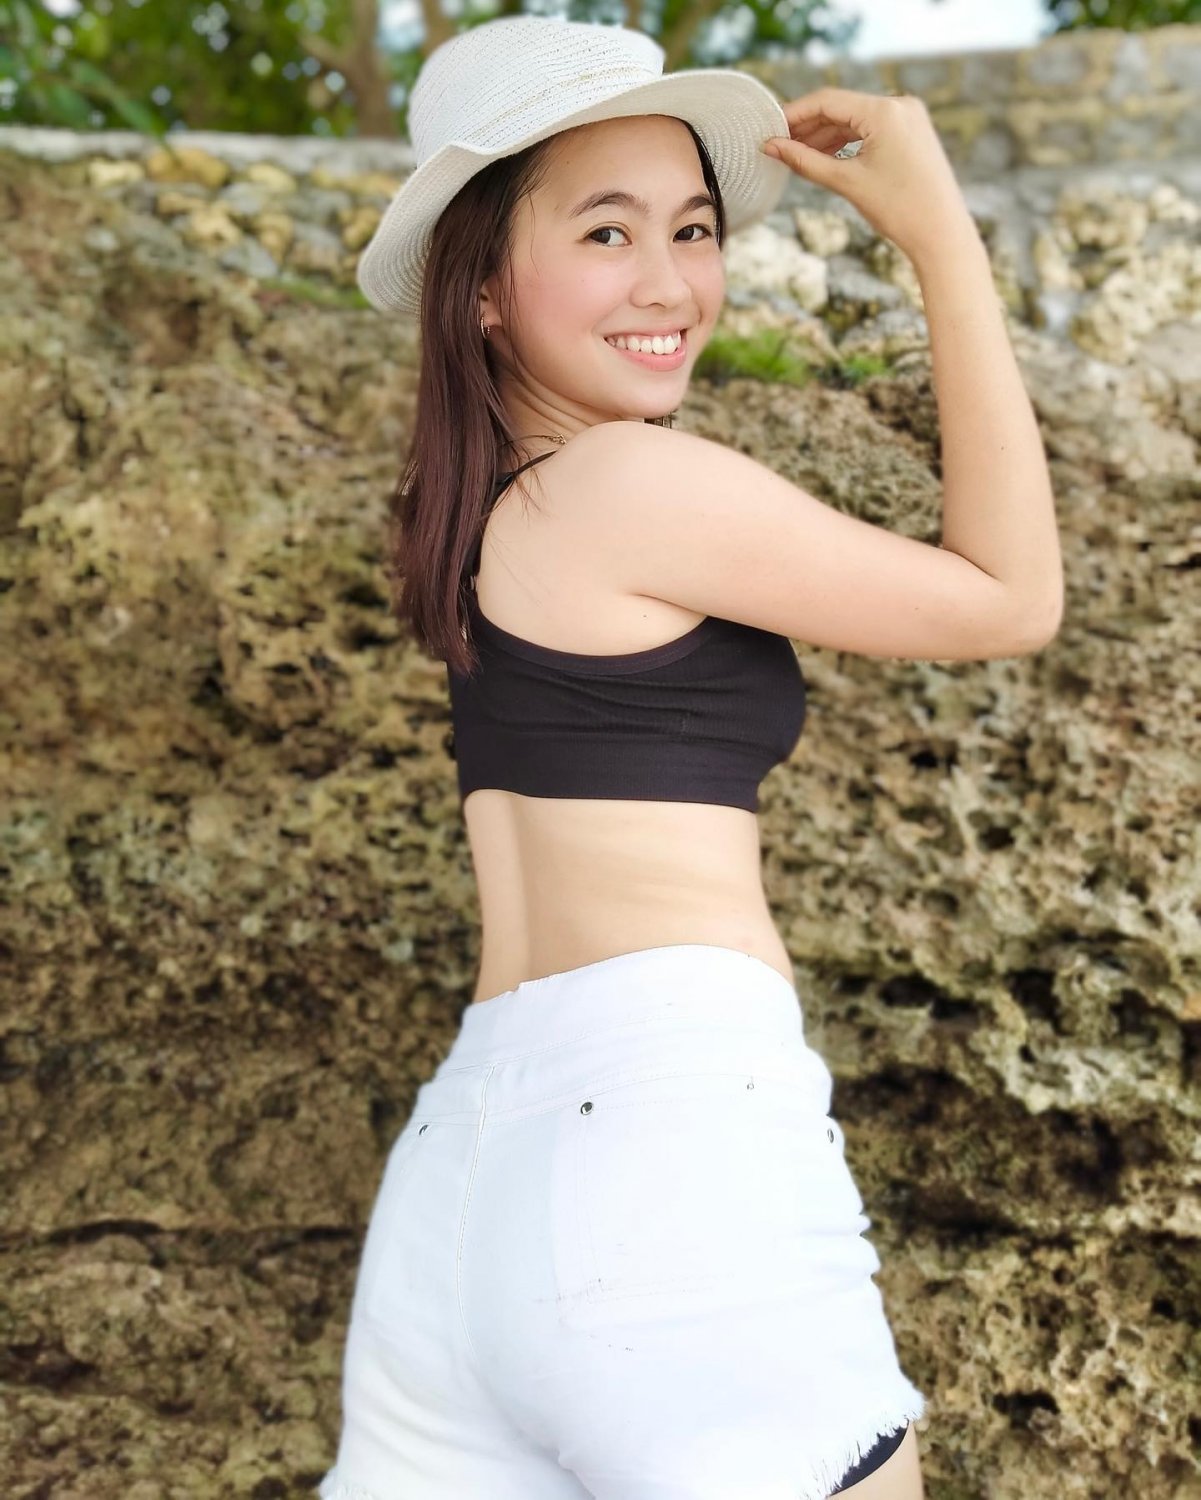 Pinay love to flaunt body and armpit #BNpLSMBK